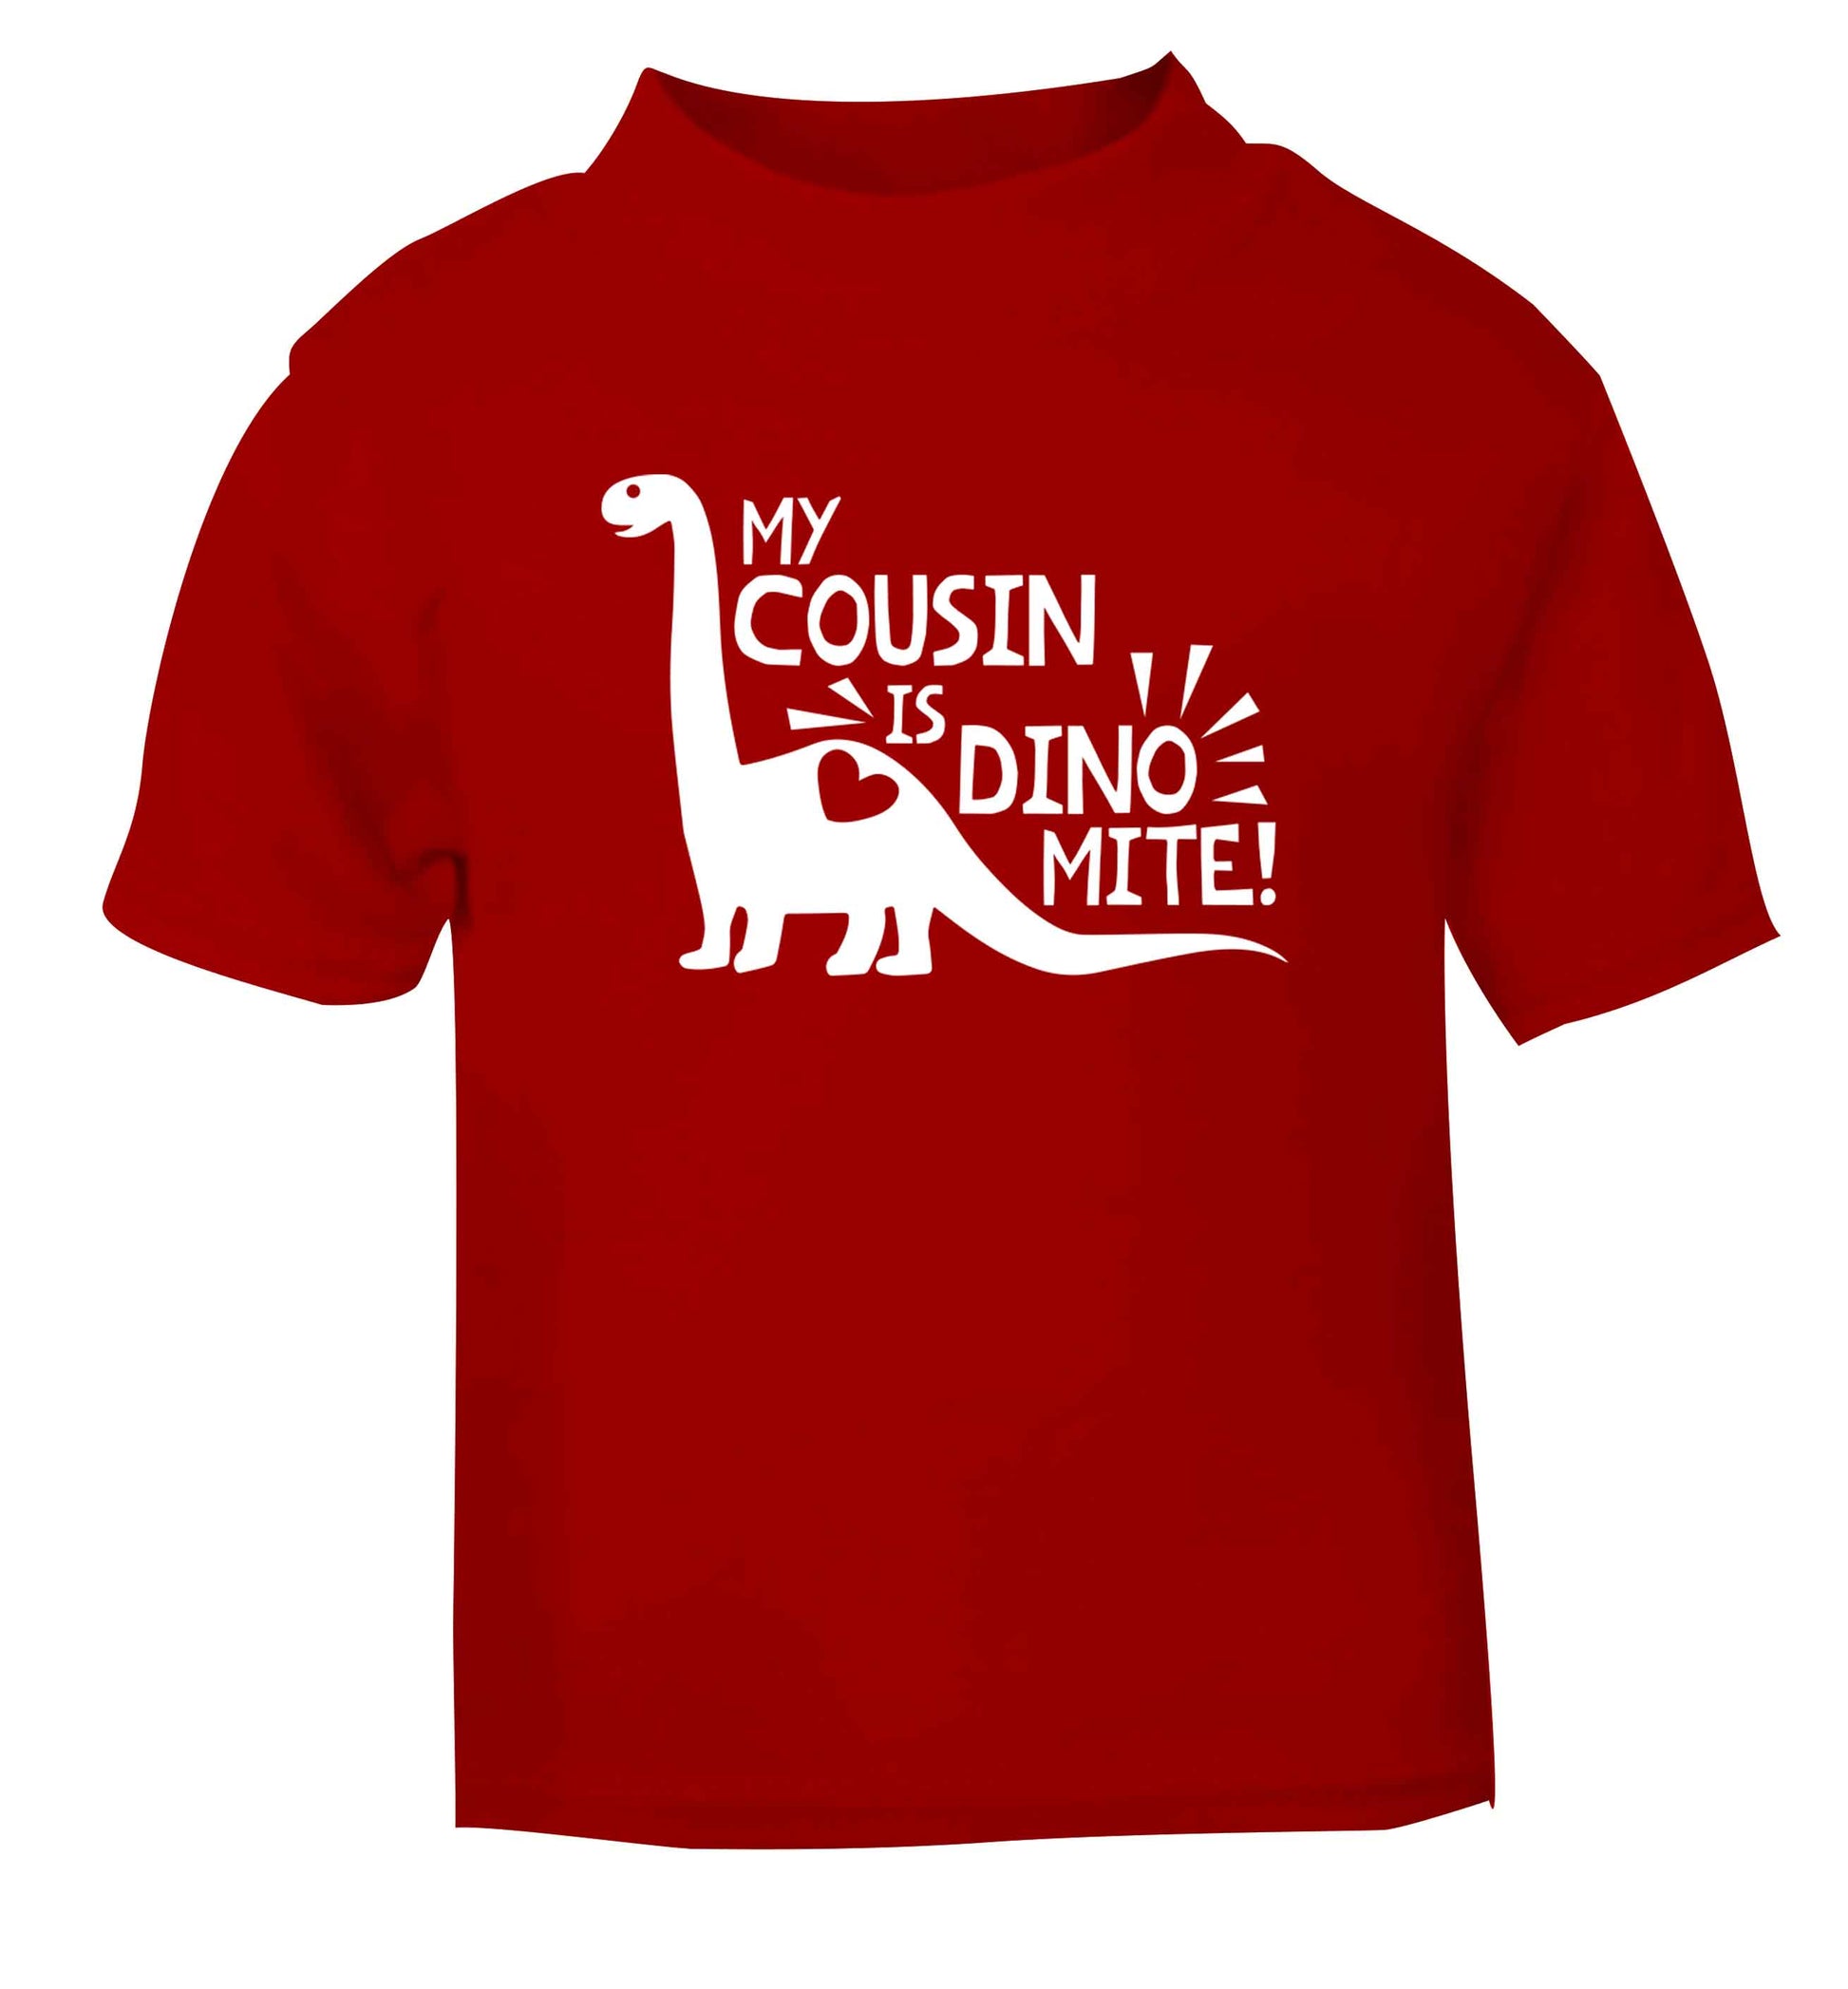 My cousin is dinomite! red Baby Toddler Tshirt 2 Years